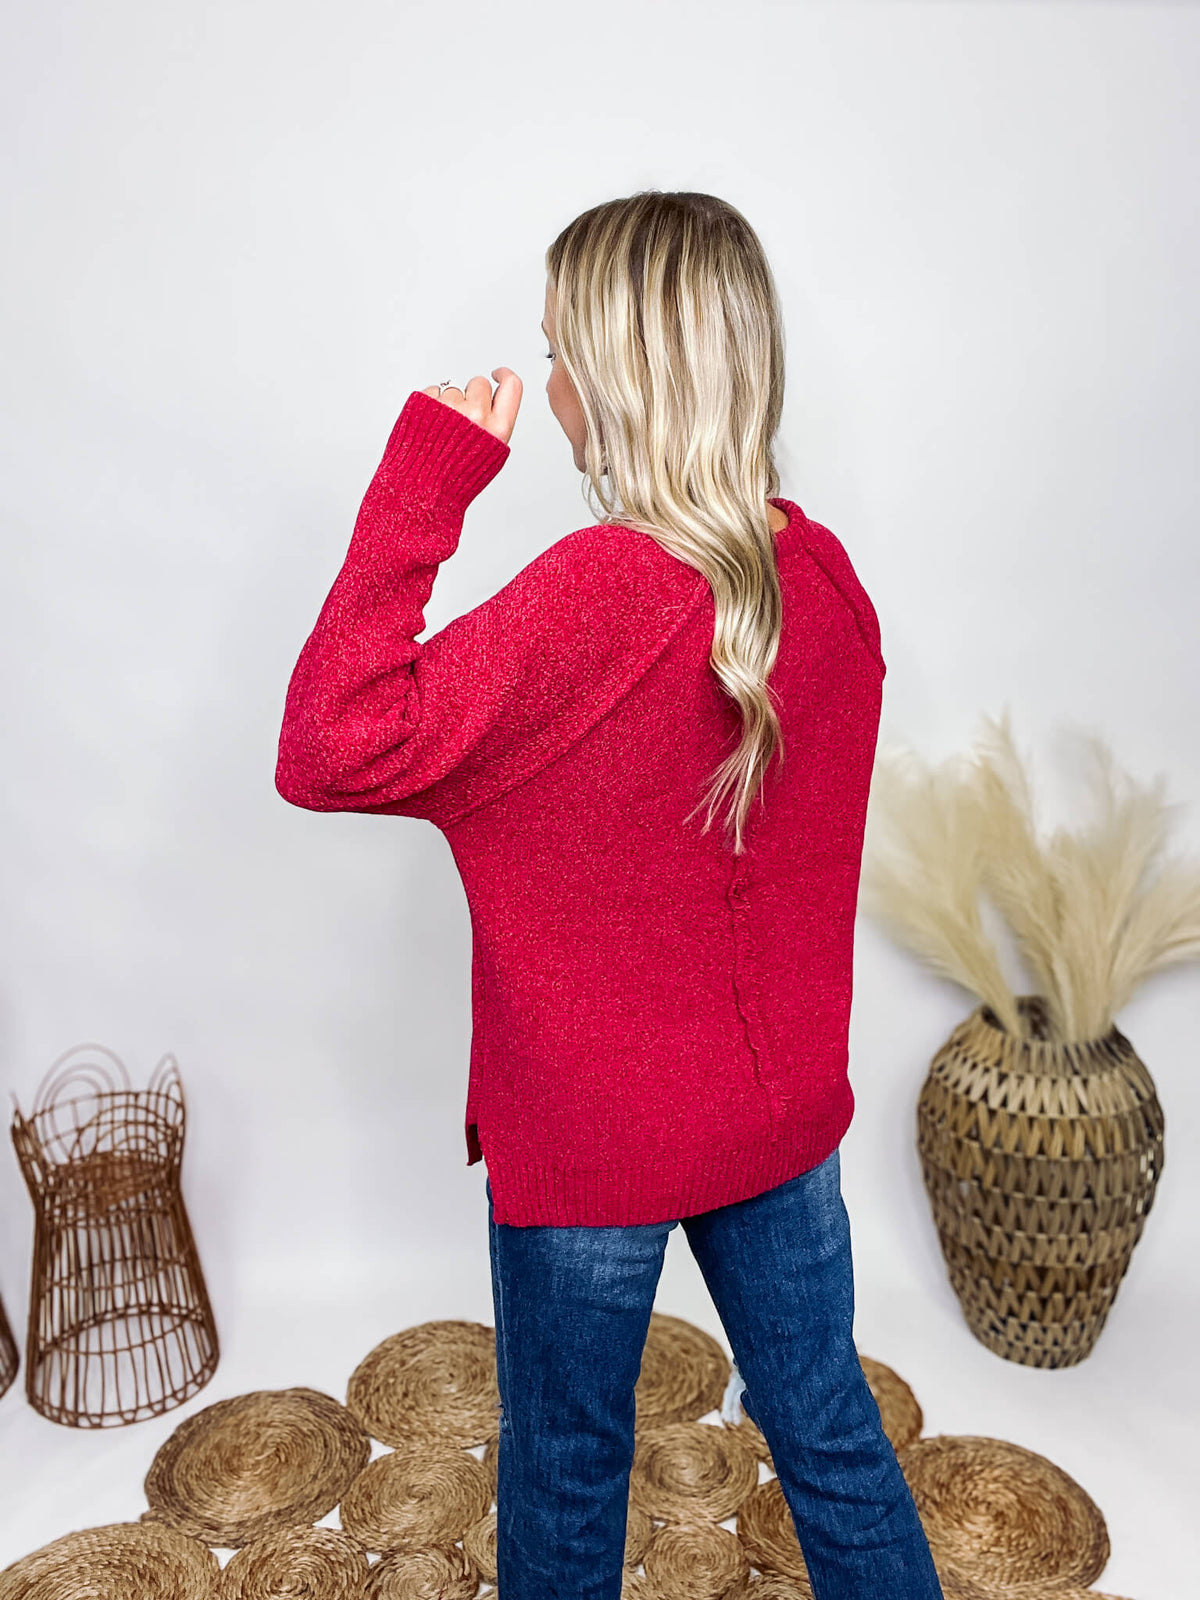 Zenana Red Berry Soft Chenille Sweater Side Slits Ribbed Hem Details Exposed Seam Details Oversized Fit 79% Polyester, 21% Acrylic 